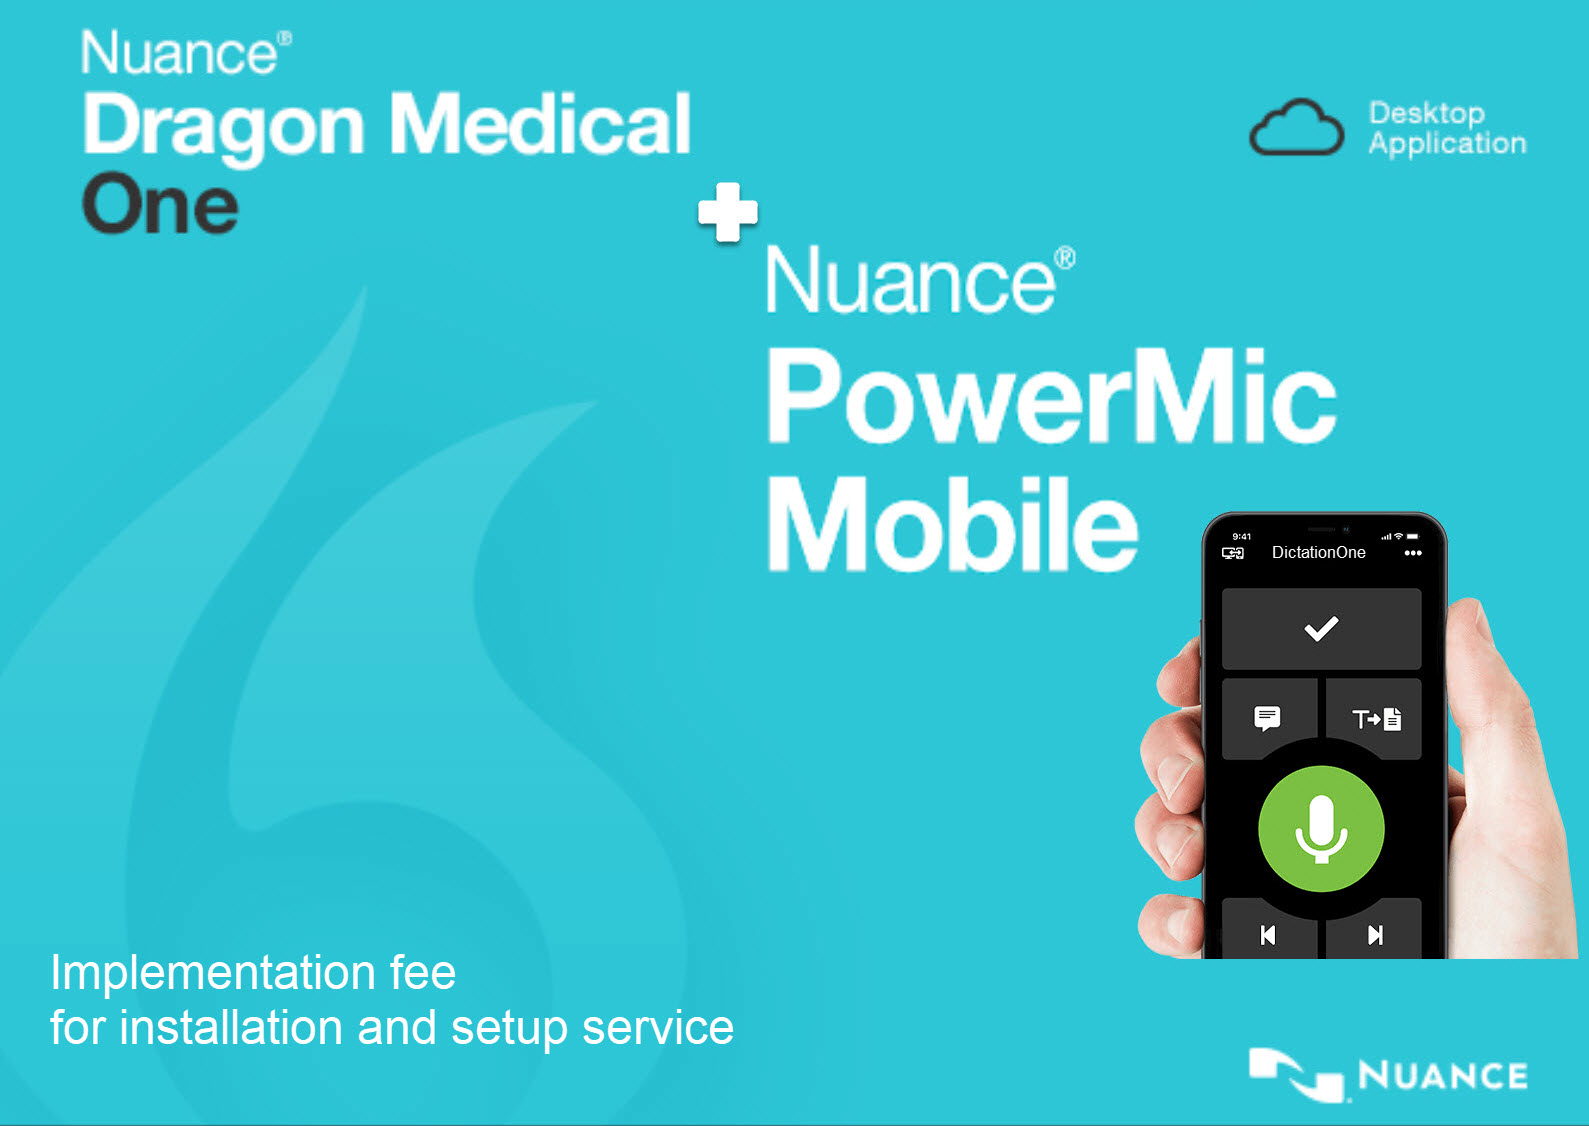 Nuance 133863 Dragon Medical One On-time Implementation Fee, Includes Installation and Setup Service